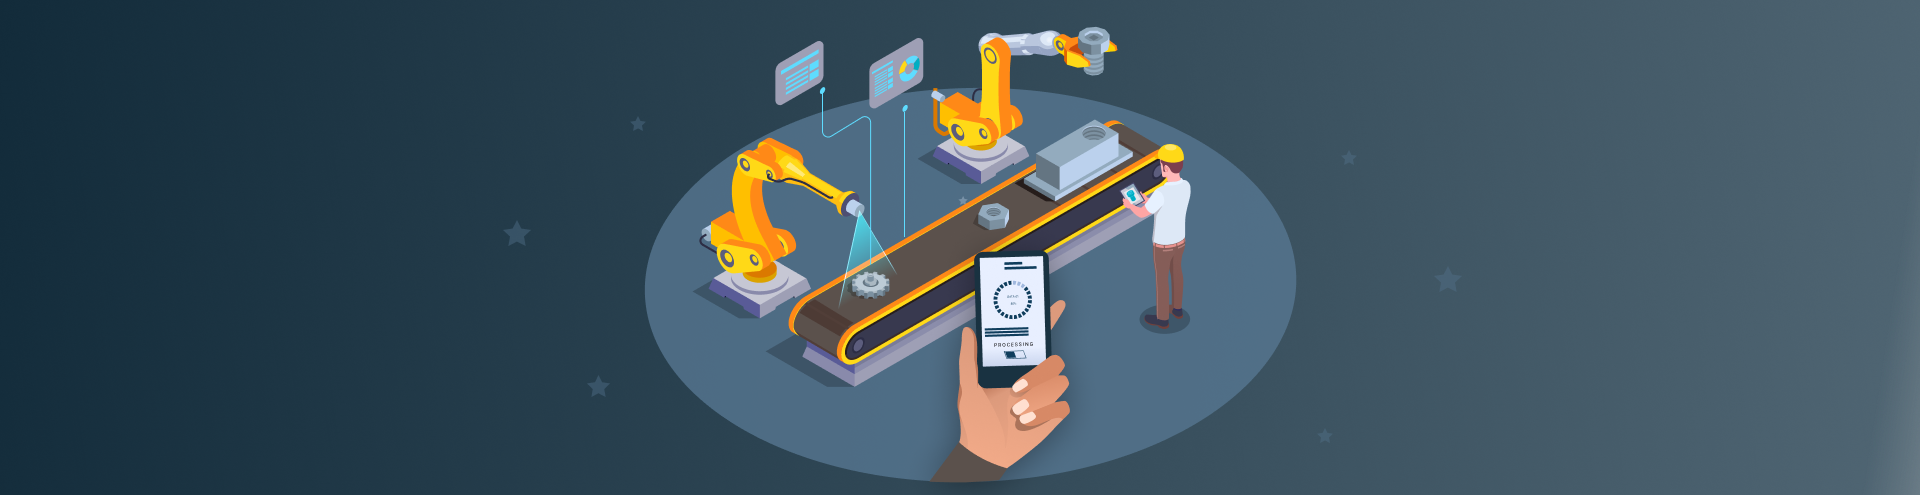 Mobile Apps for Manufacturing: Types and Features That Reshape Industry